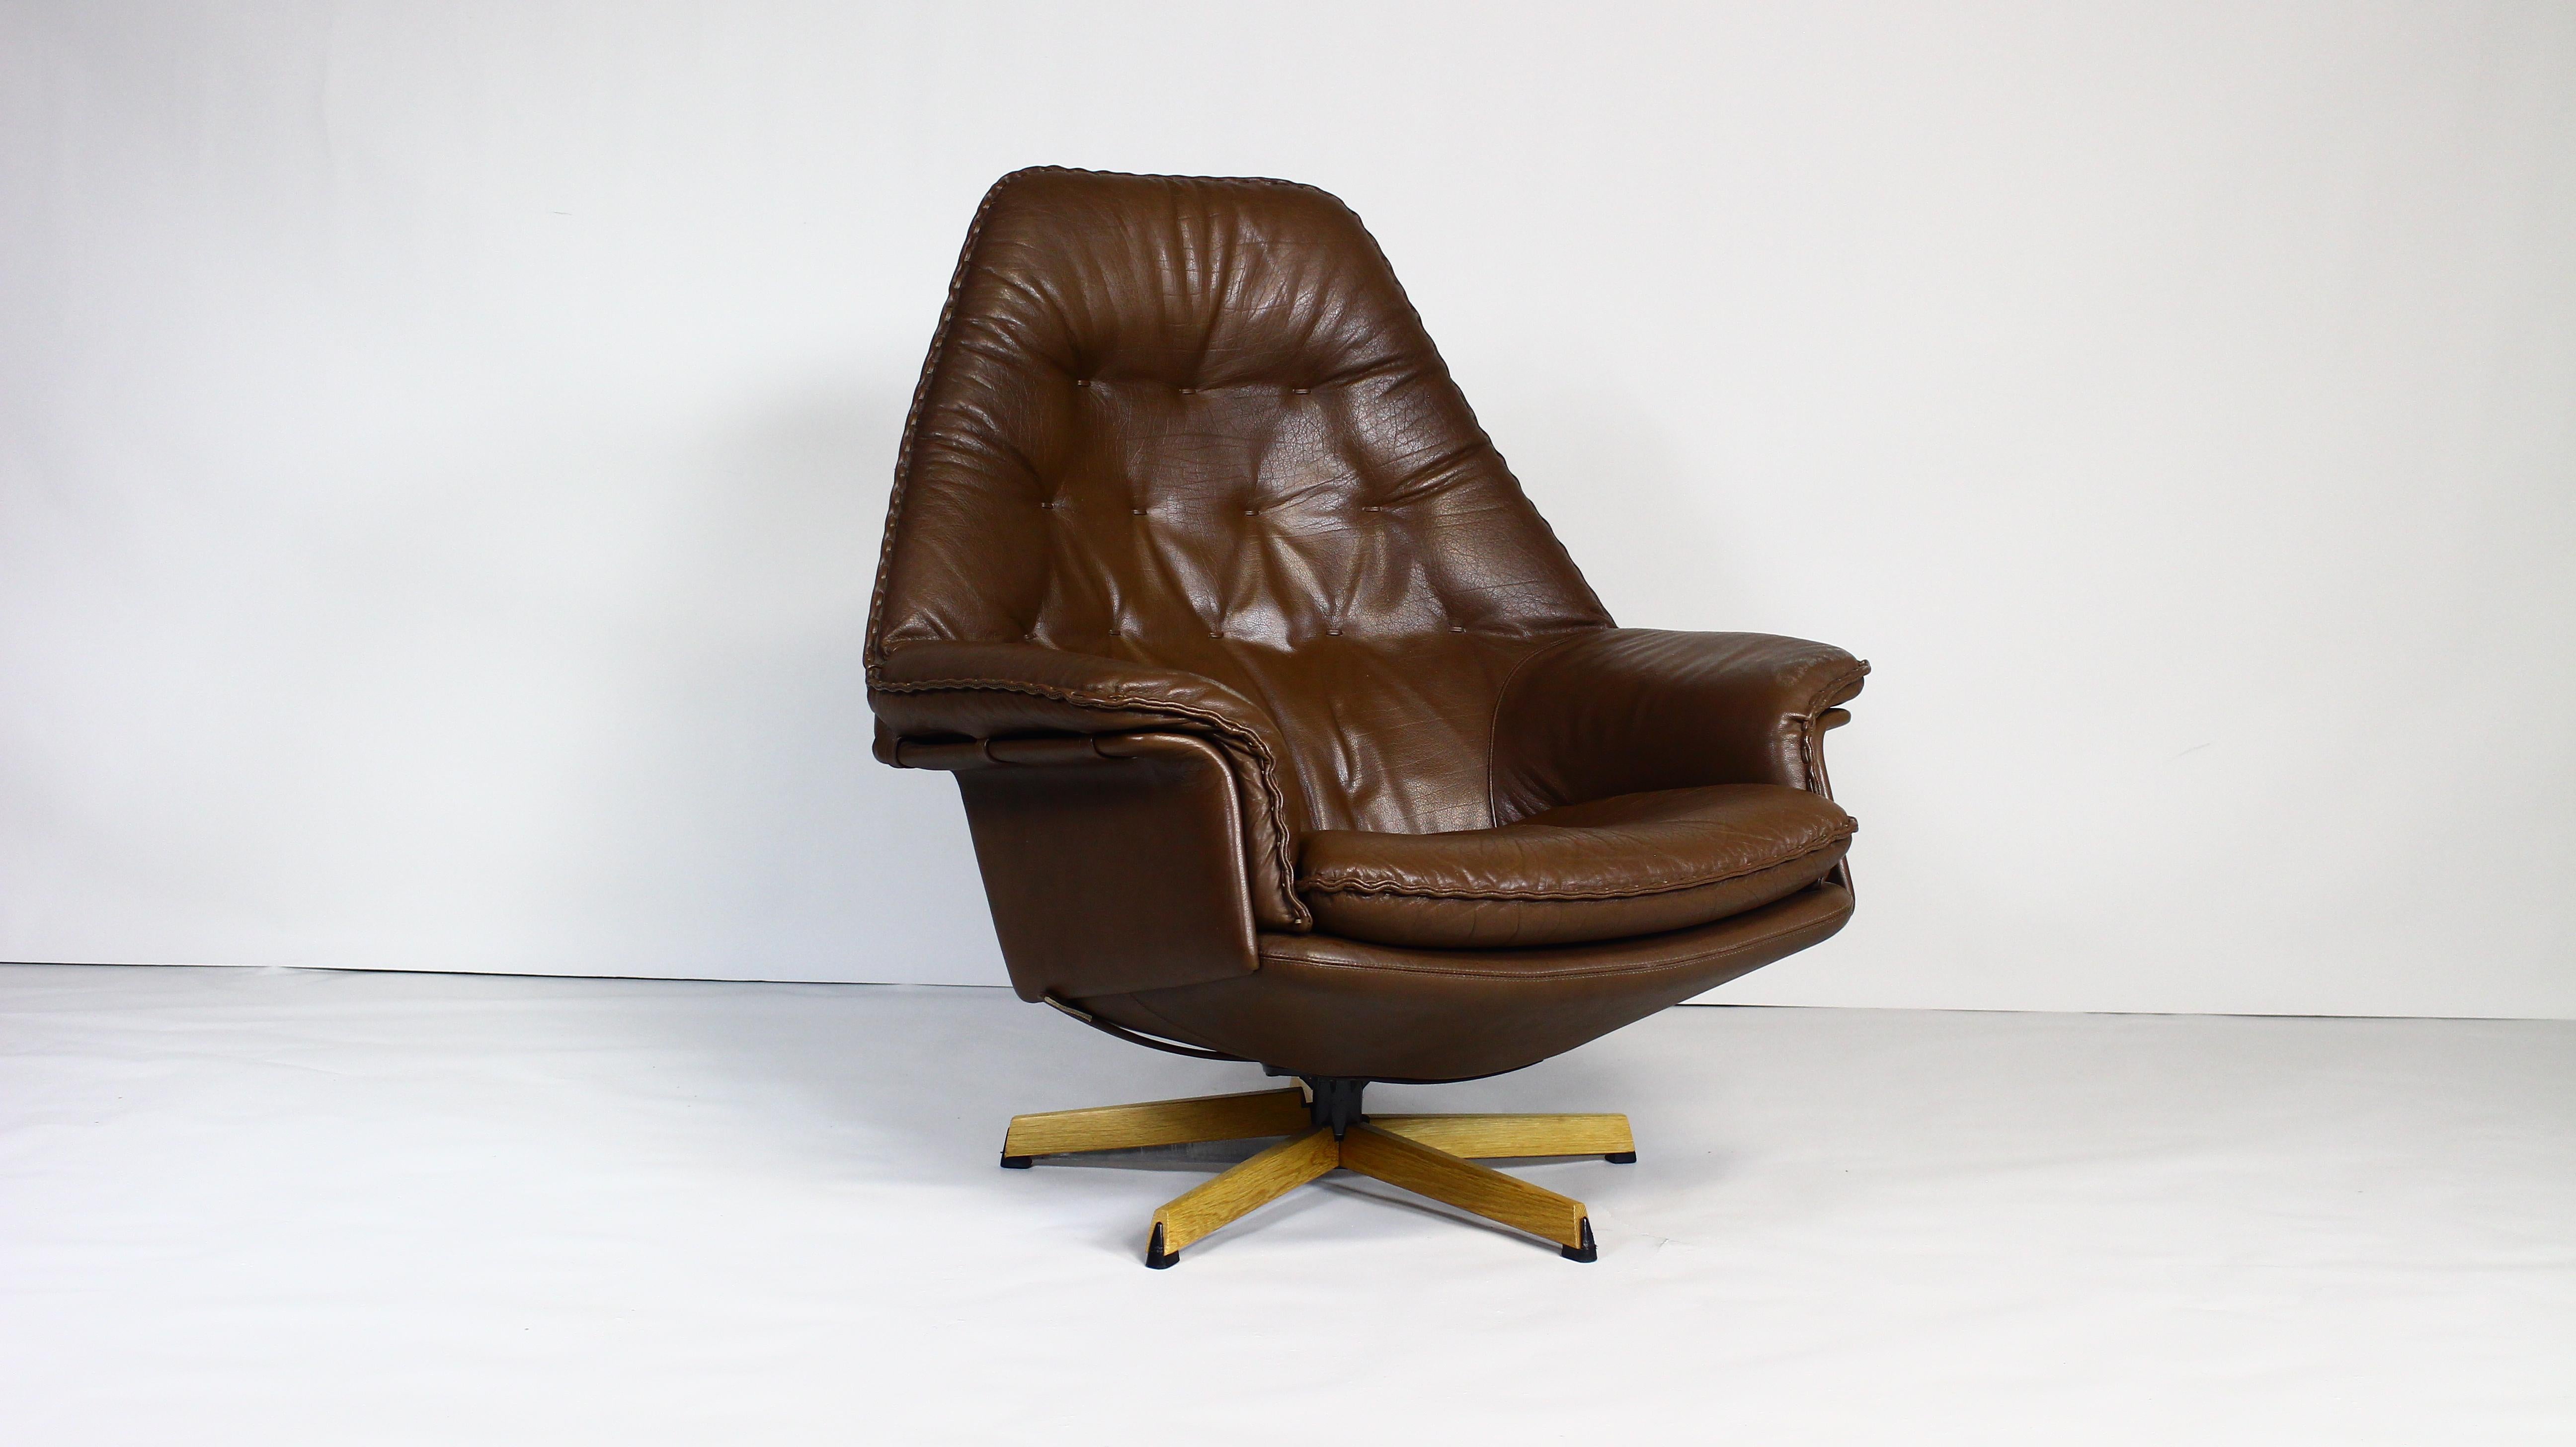 Danish 1960s swivel lounge chair, designed by notable design duo Acton Schubell and Ib Madsen.
The chair is upholstered throughout in genuine textured buffalo leather, which is brown in colour.
The backrest, seat and head cushions feature leather